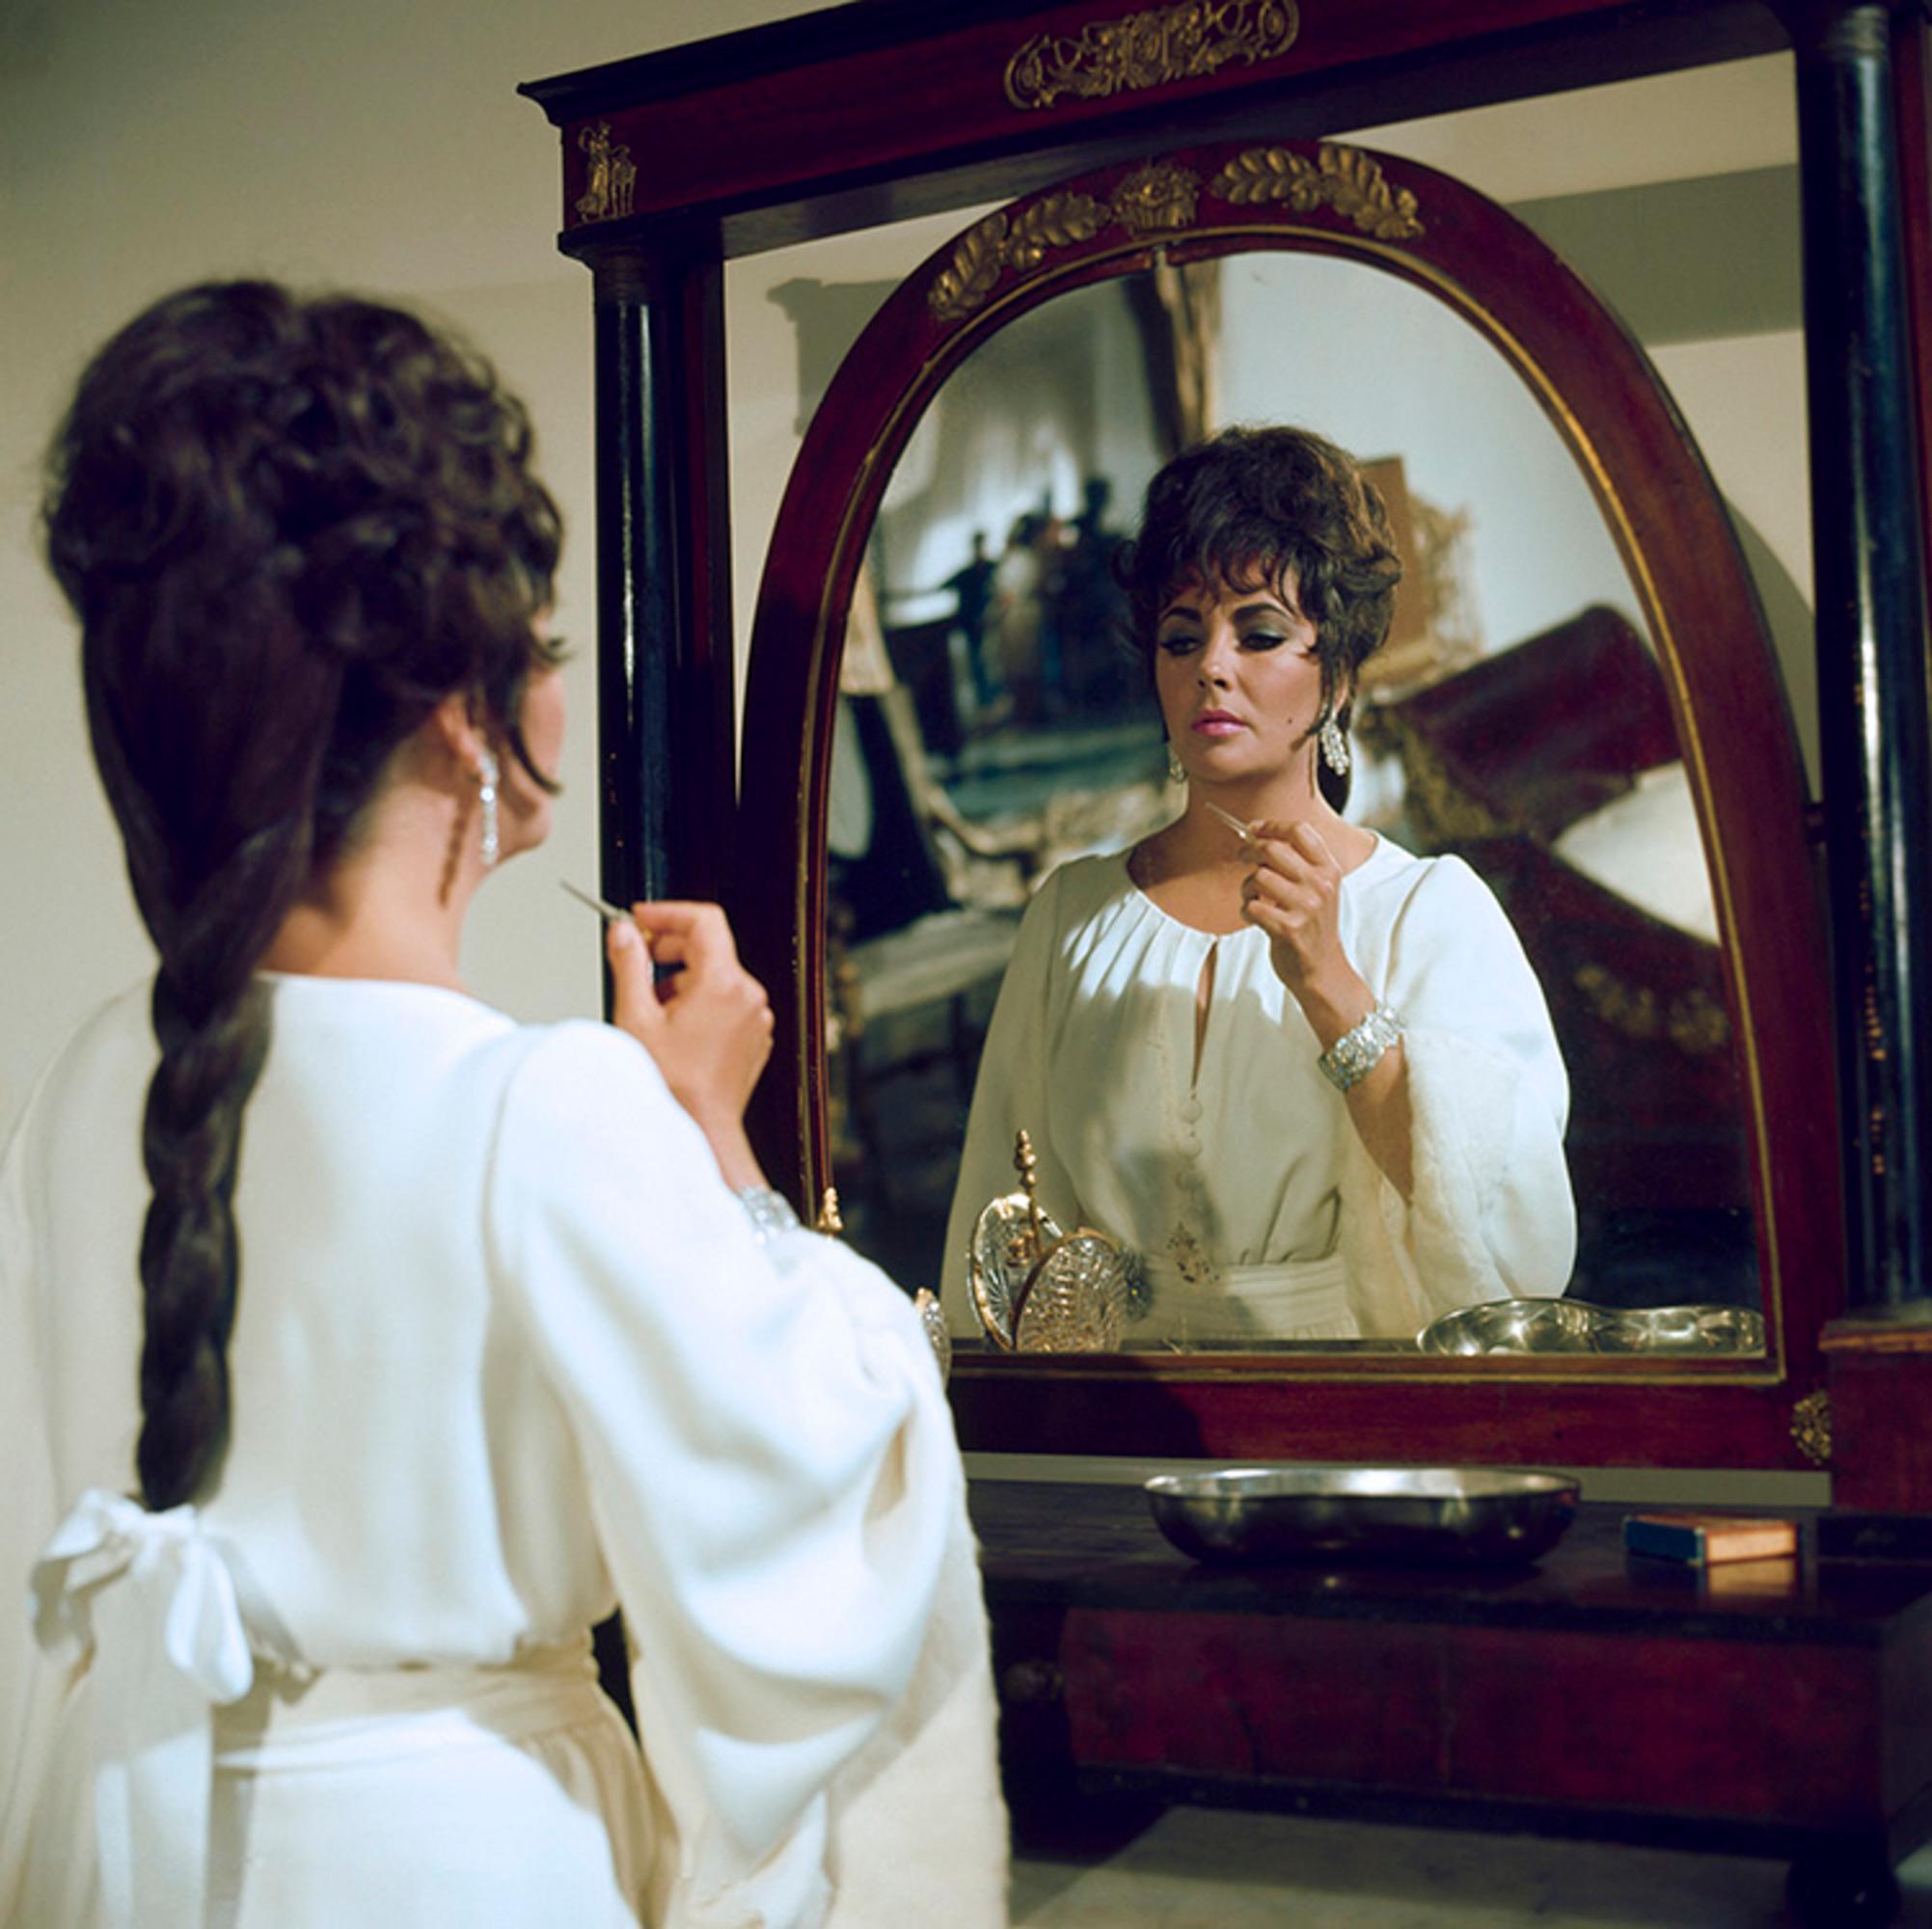 Title: Elizabeth Taylor (in the Mirror) on Set of 'Boom!'

C-type print signed and numbered by Gered Mankowitz

Elizabeth Taylor photographed on set of Joseph Losey’s romantic drama film ‘Boom!’ in Sardinia, 1968.

Available Sizes:
16" x 20” Edition